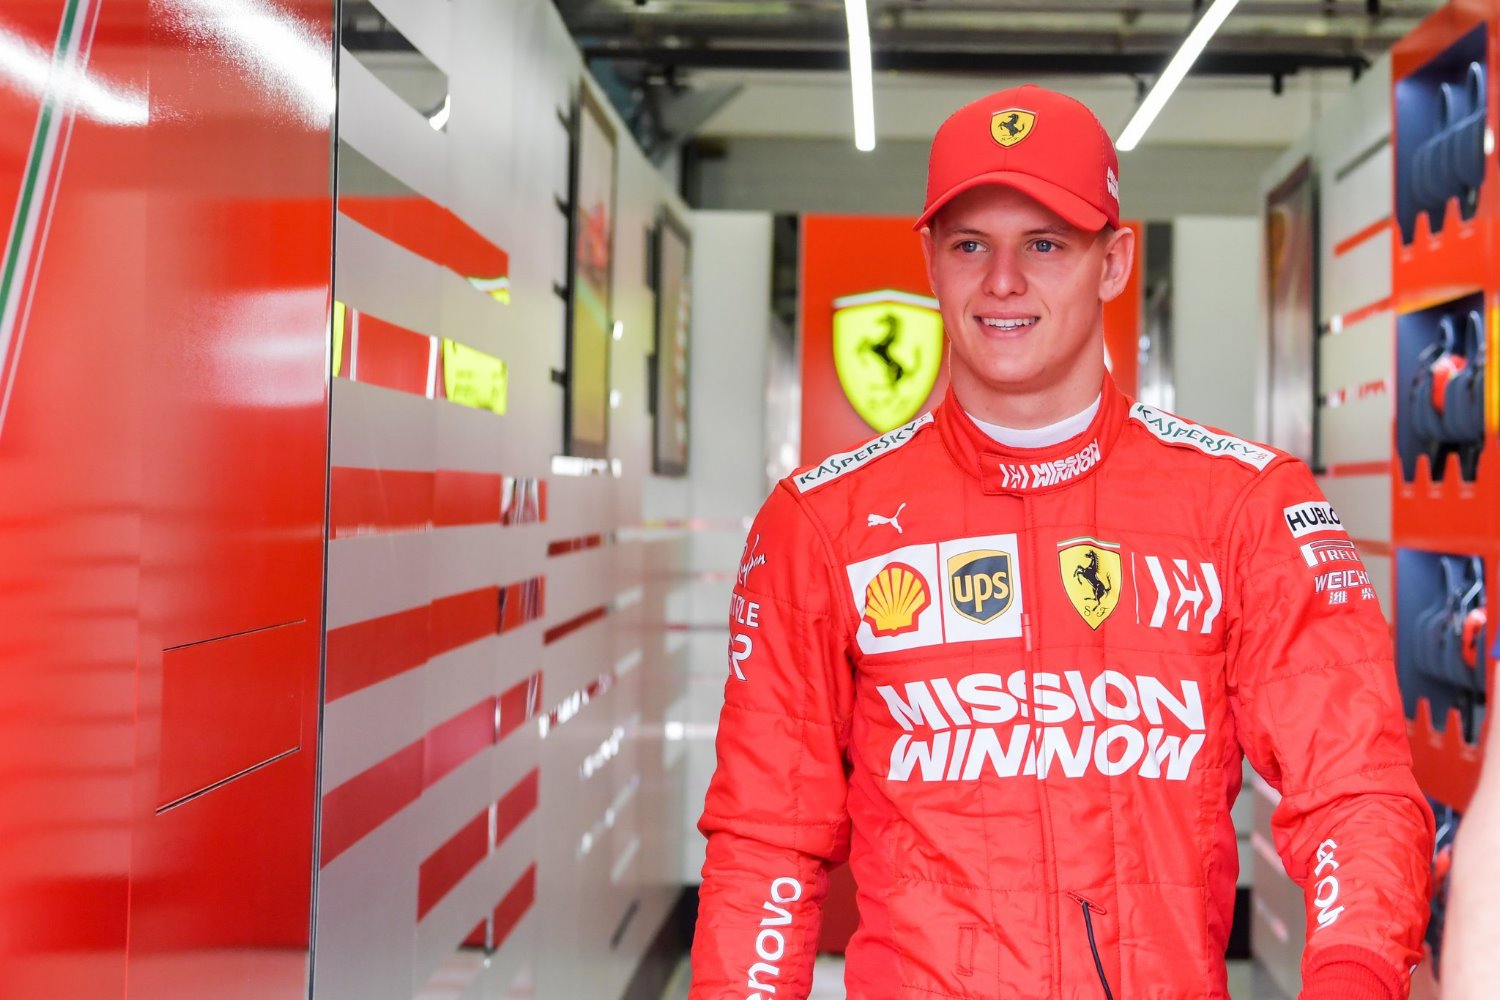 Mick Schumacher's laps have been limited due to rain